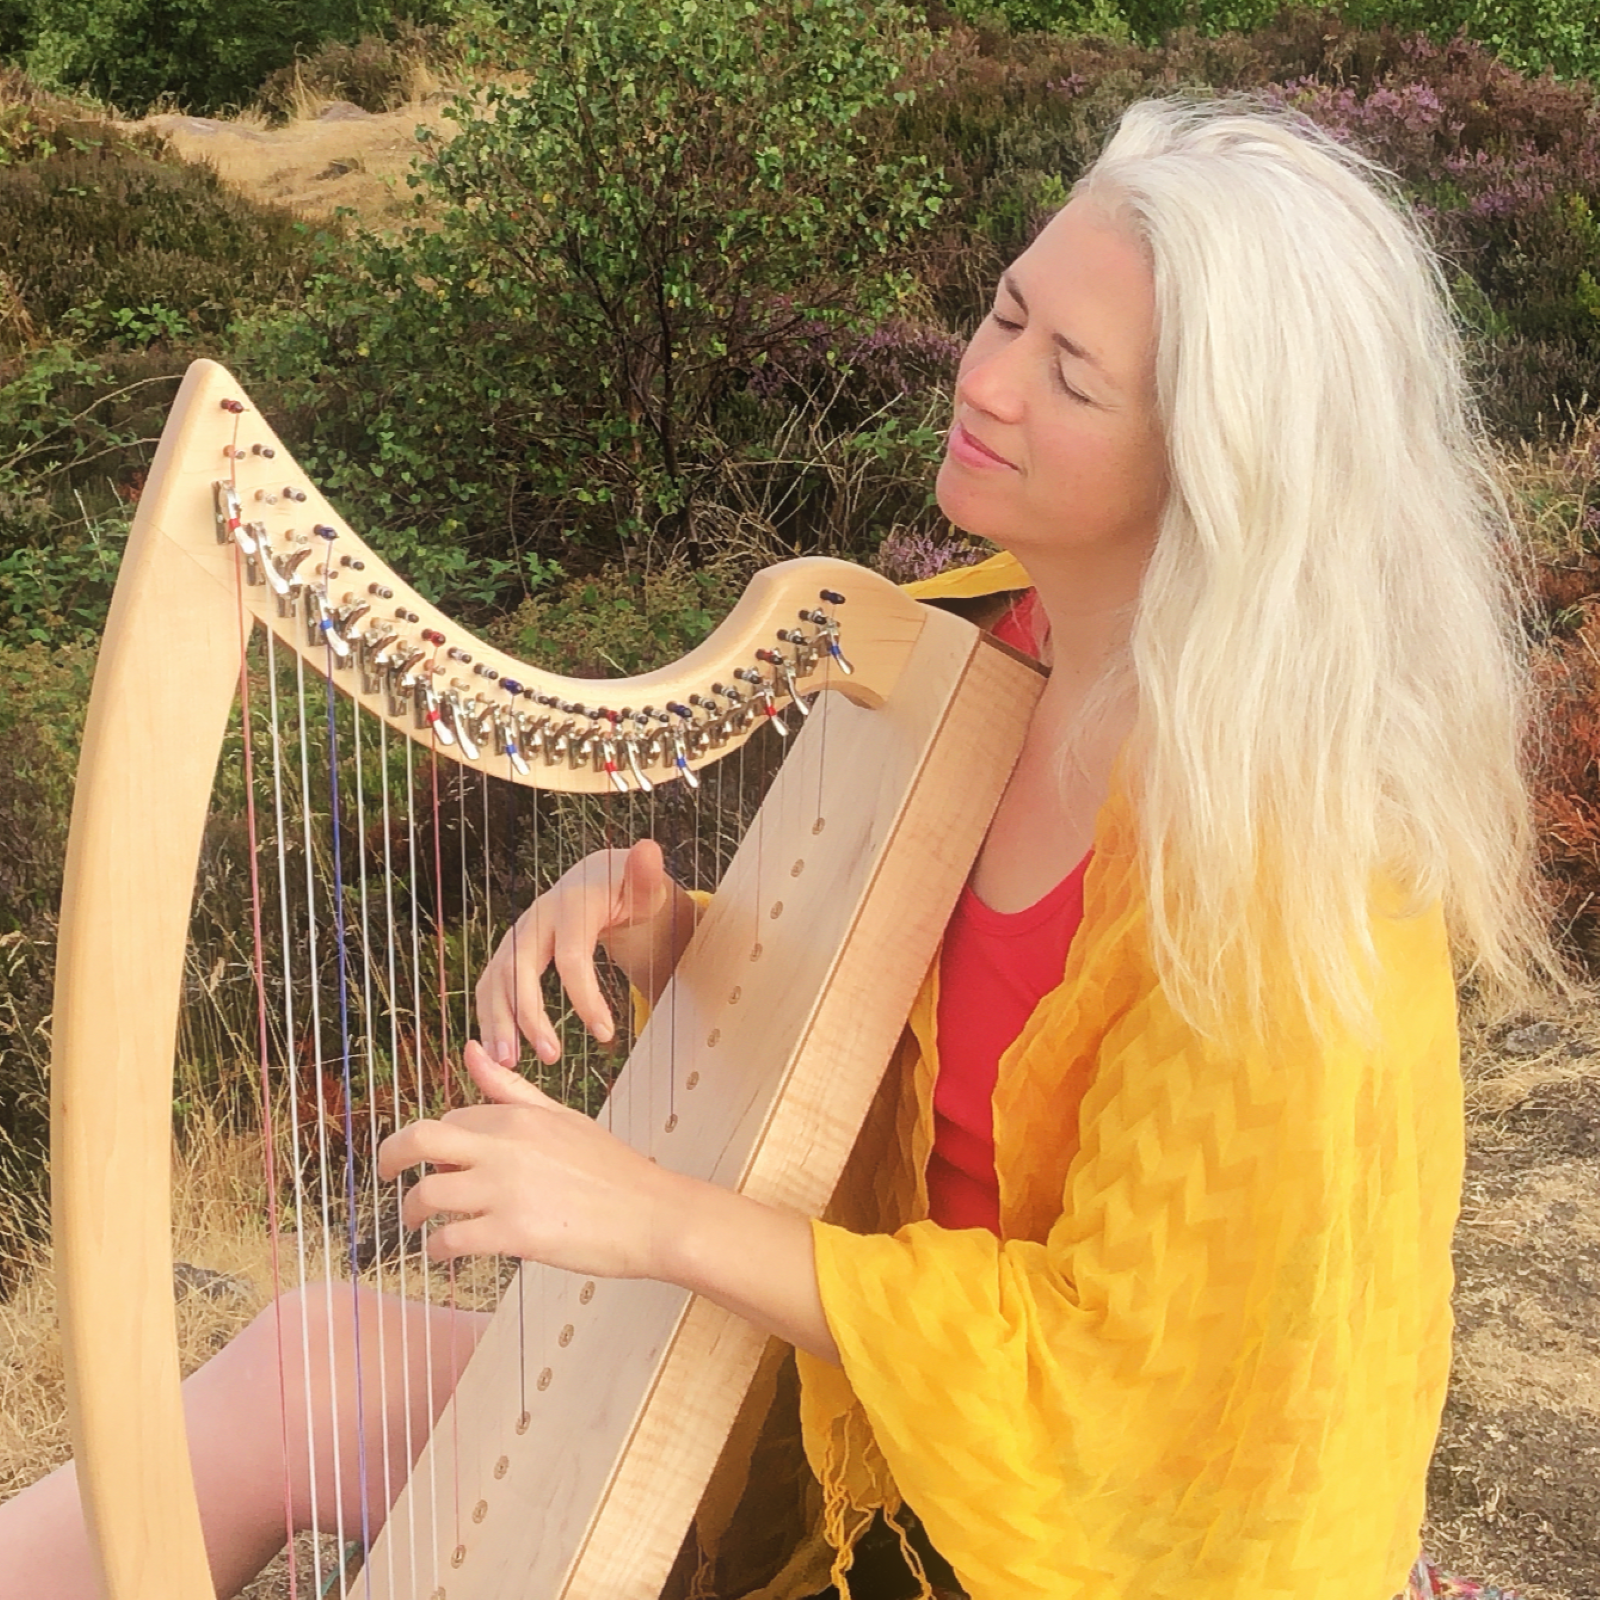 girl with silver hair playing the harp in nature